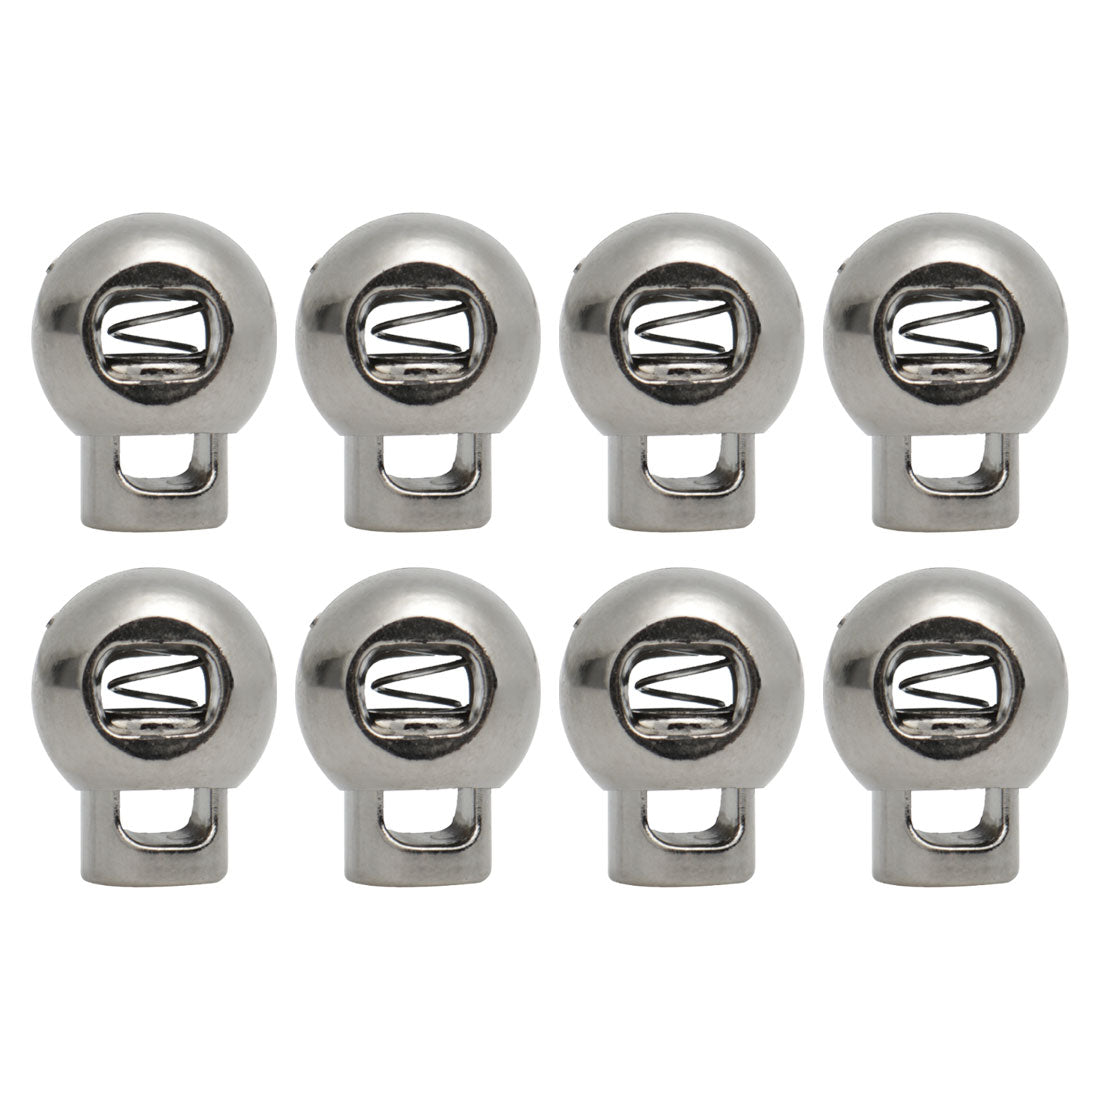 uxcell Uxcell 8pcs Plastic Cord Lock Stopper Spring Fastener Organizers Silver Tone